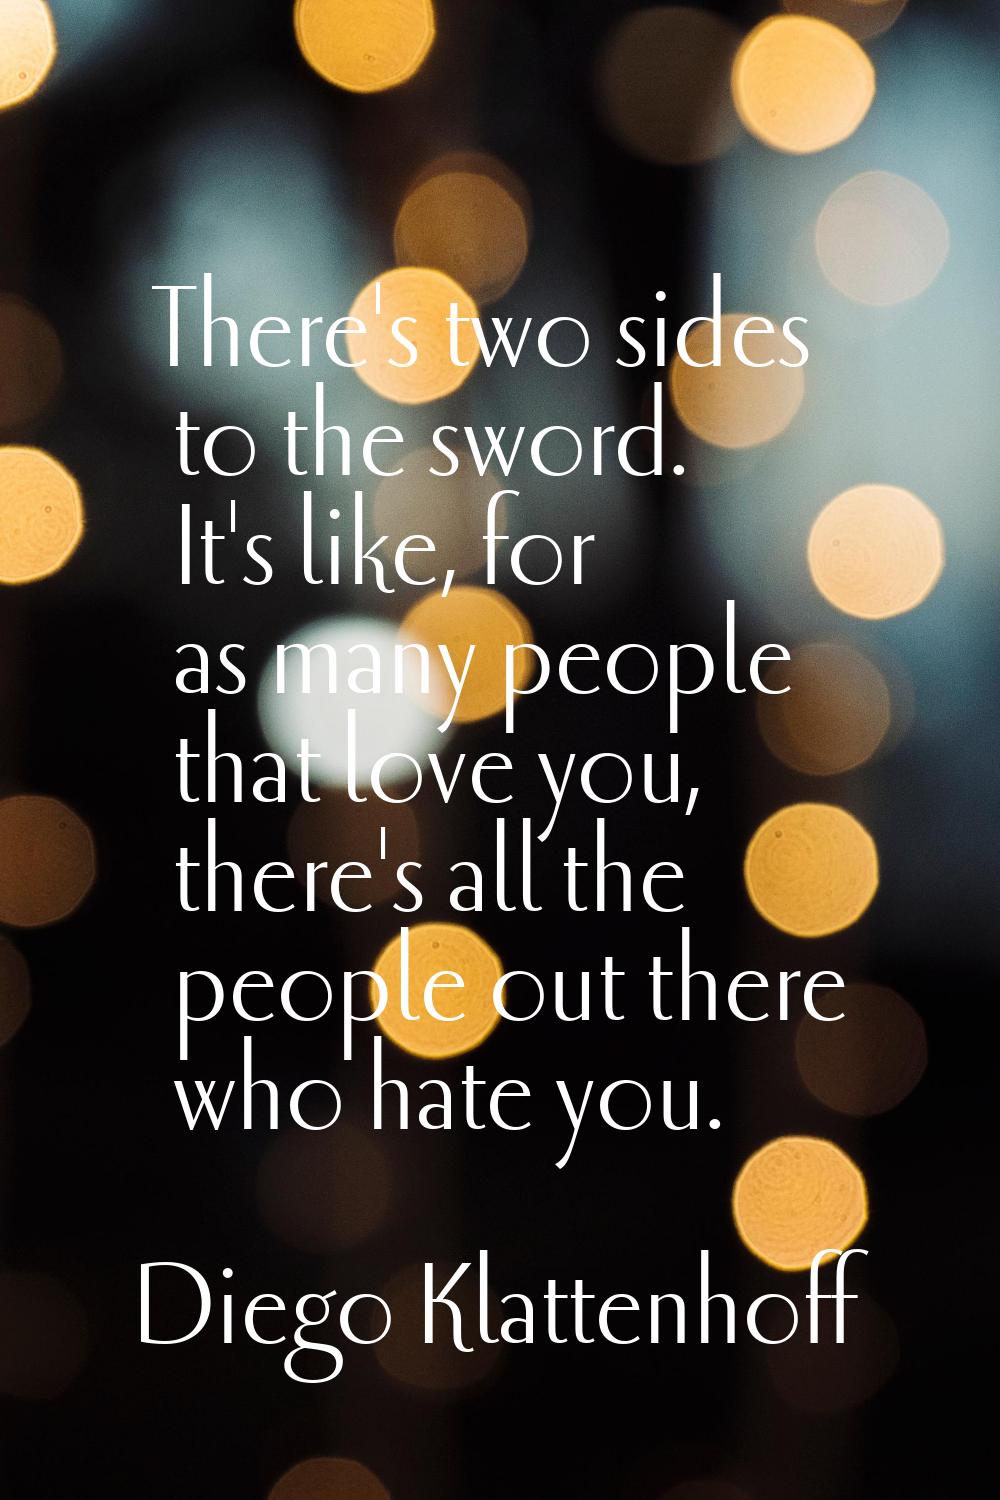 There's two sides to the sword. It's like, for as many people that love you, there's all the people